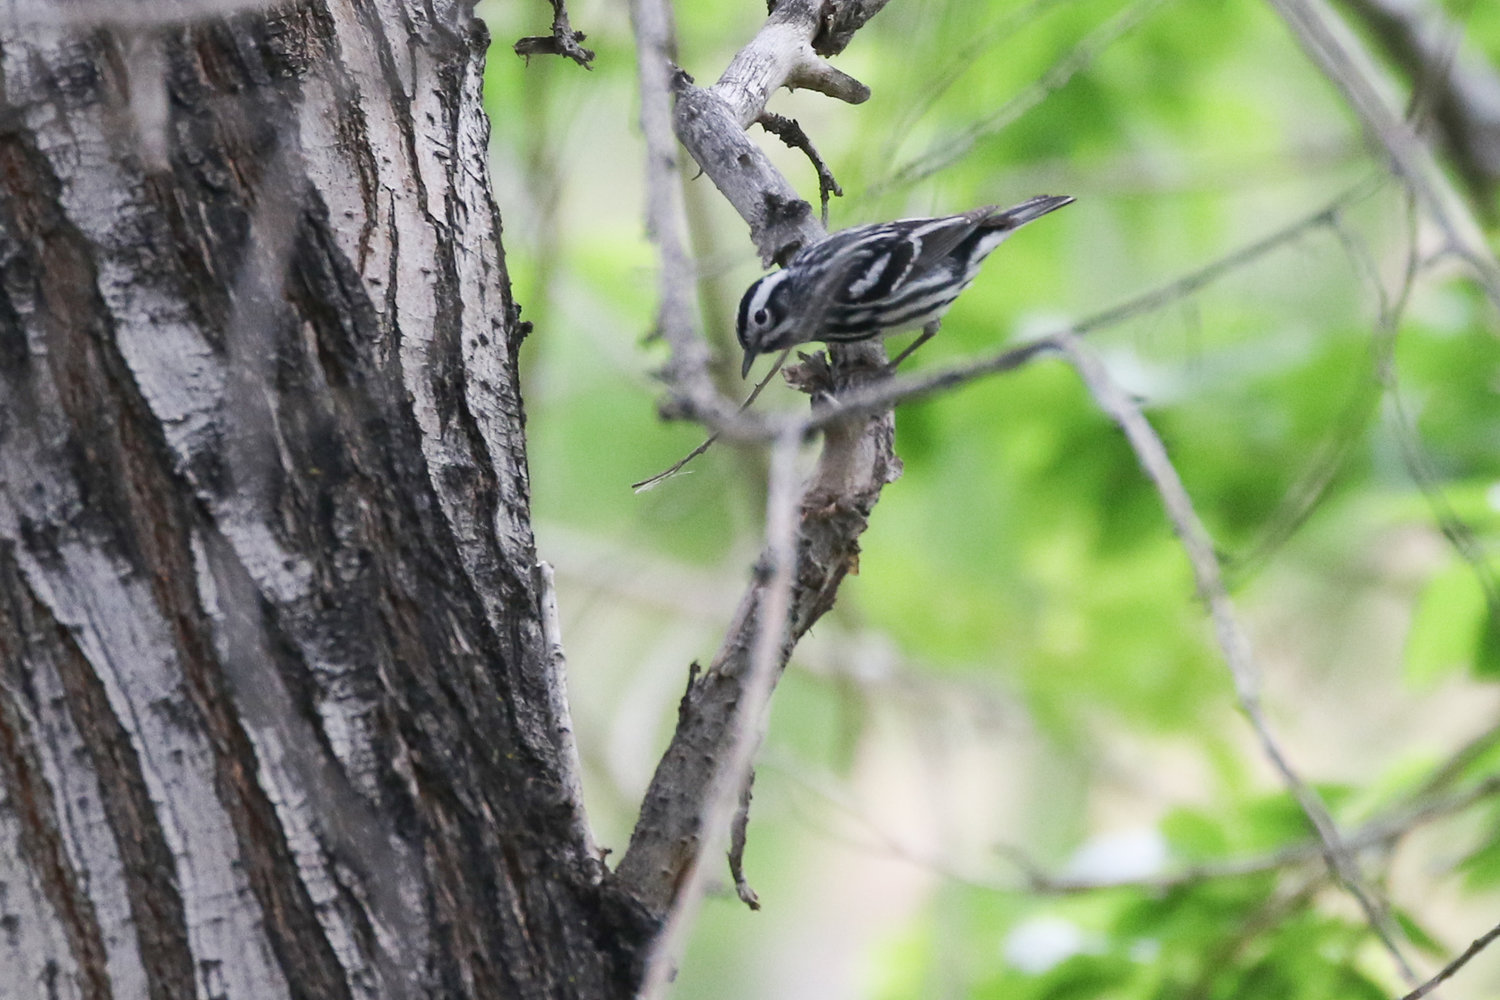 This Black & White Warbler was found way out of its normal habitat in Getty's Cove, in eastern Washington.